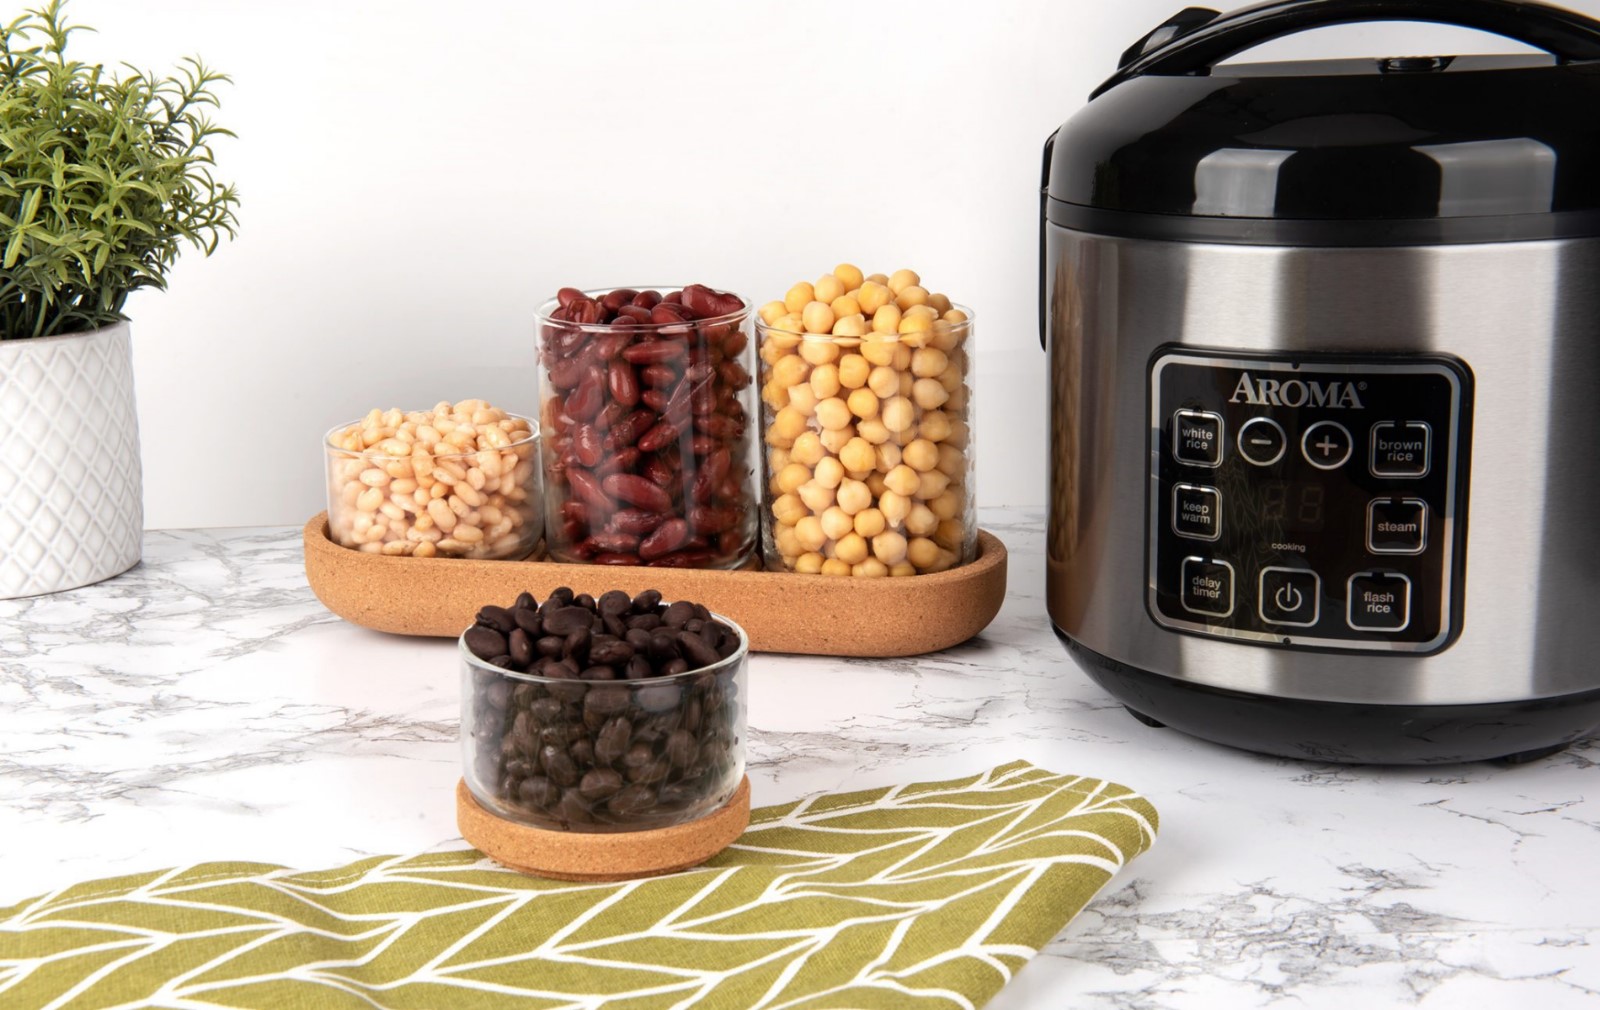 https://recipes.net/wp-content/uploads/2023/10/how-to-cook-beans-in-aroma-rice-cooker-1698756701.jpg